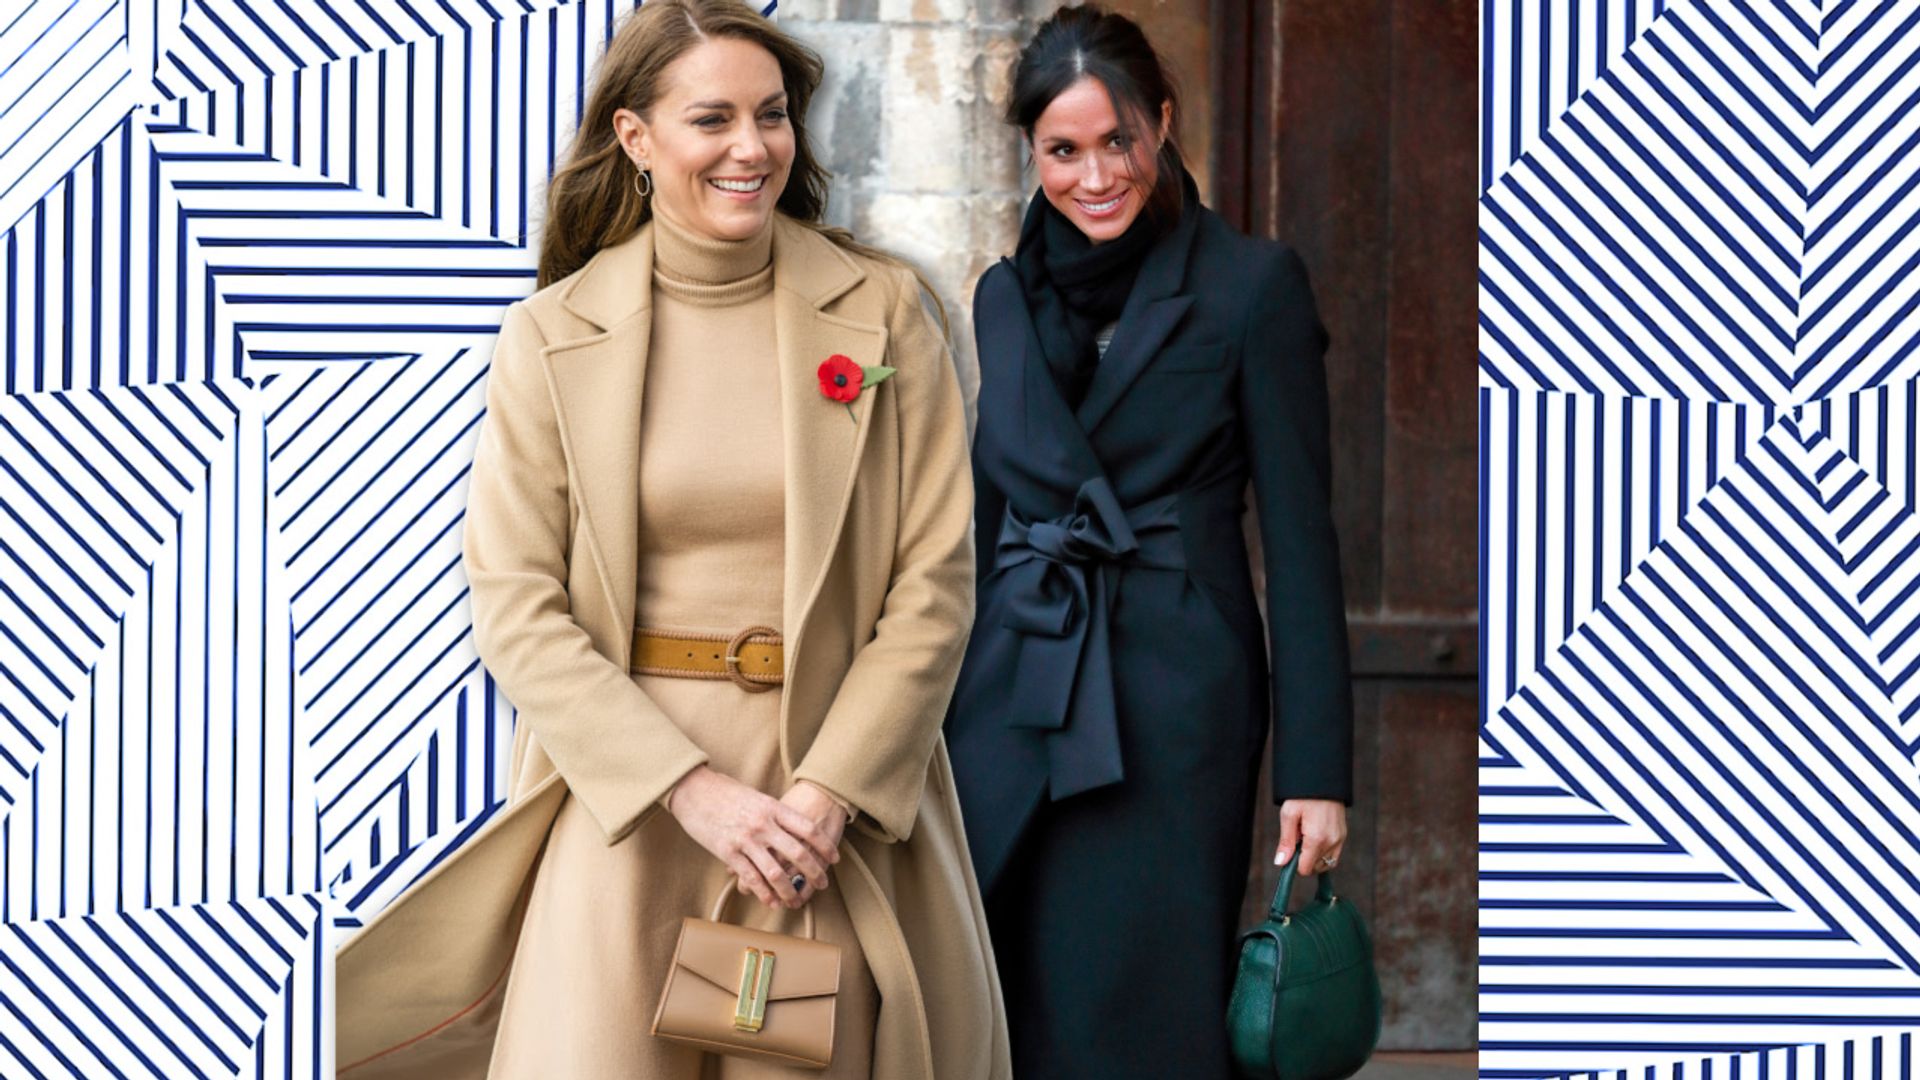 We bet Meghan Markle will be carrying this handbag this summer